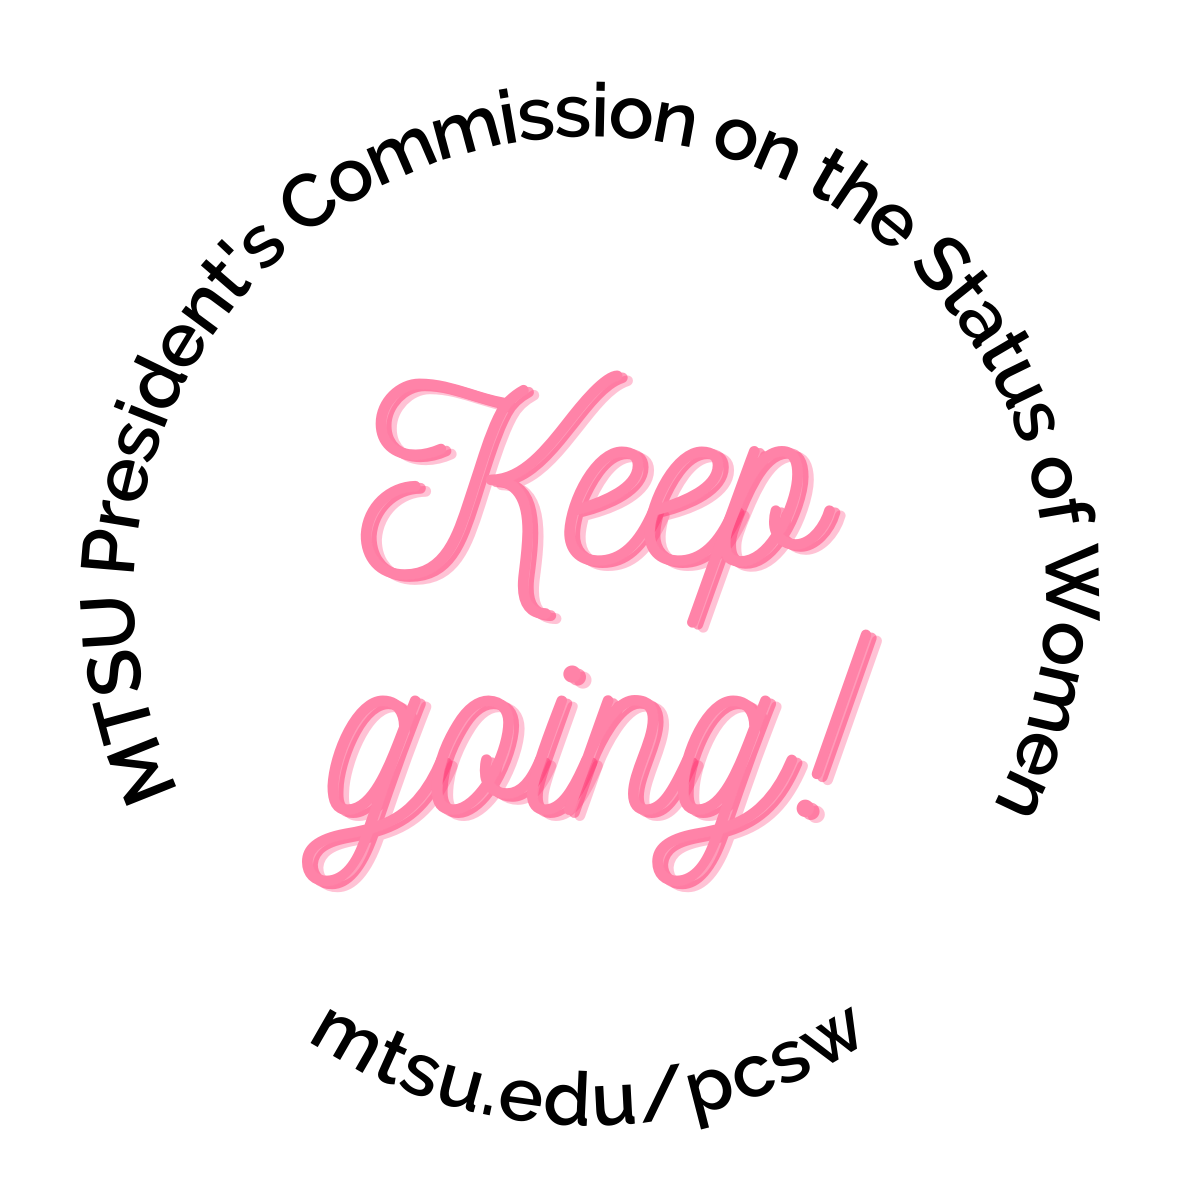 Keep Going in pink cursive font. Text around circle, MTSU President's Commission on the Status of Women mtsu.edu/pcsw